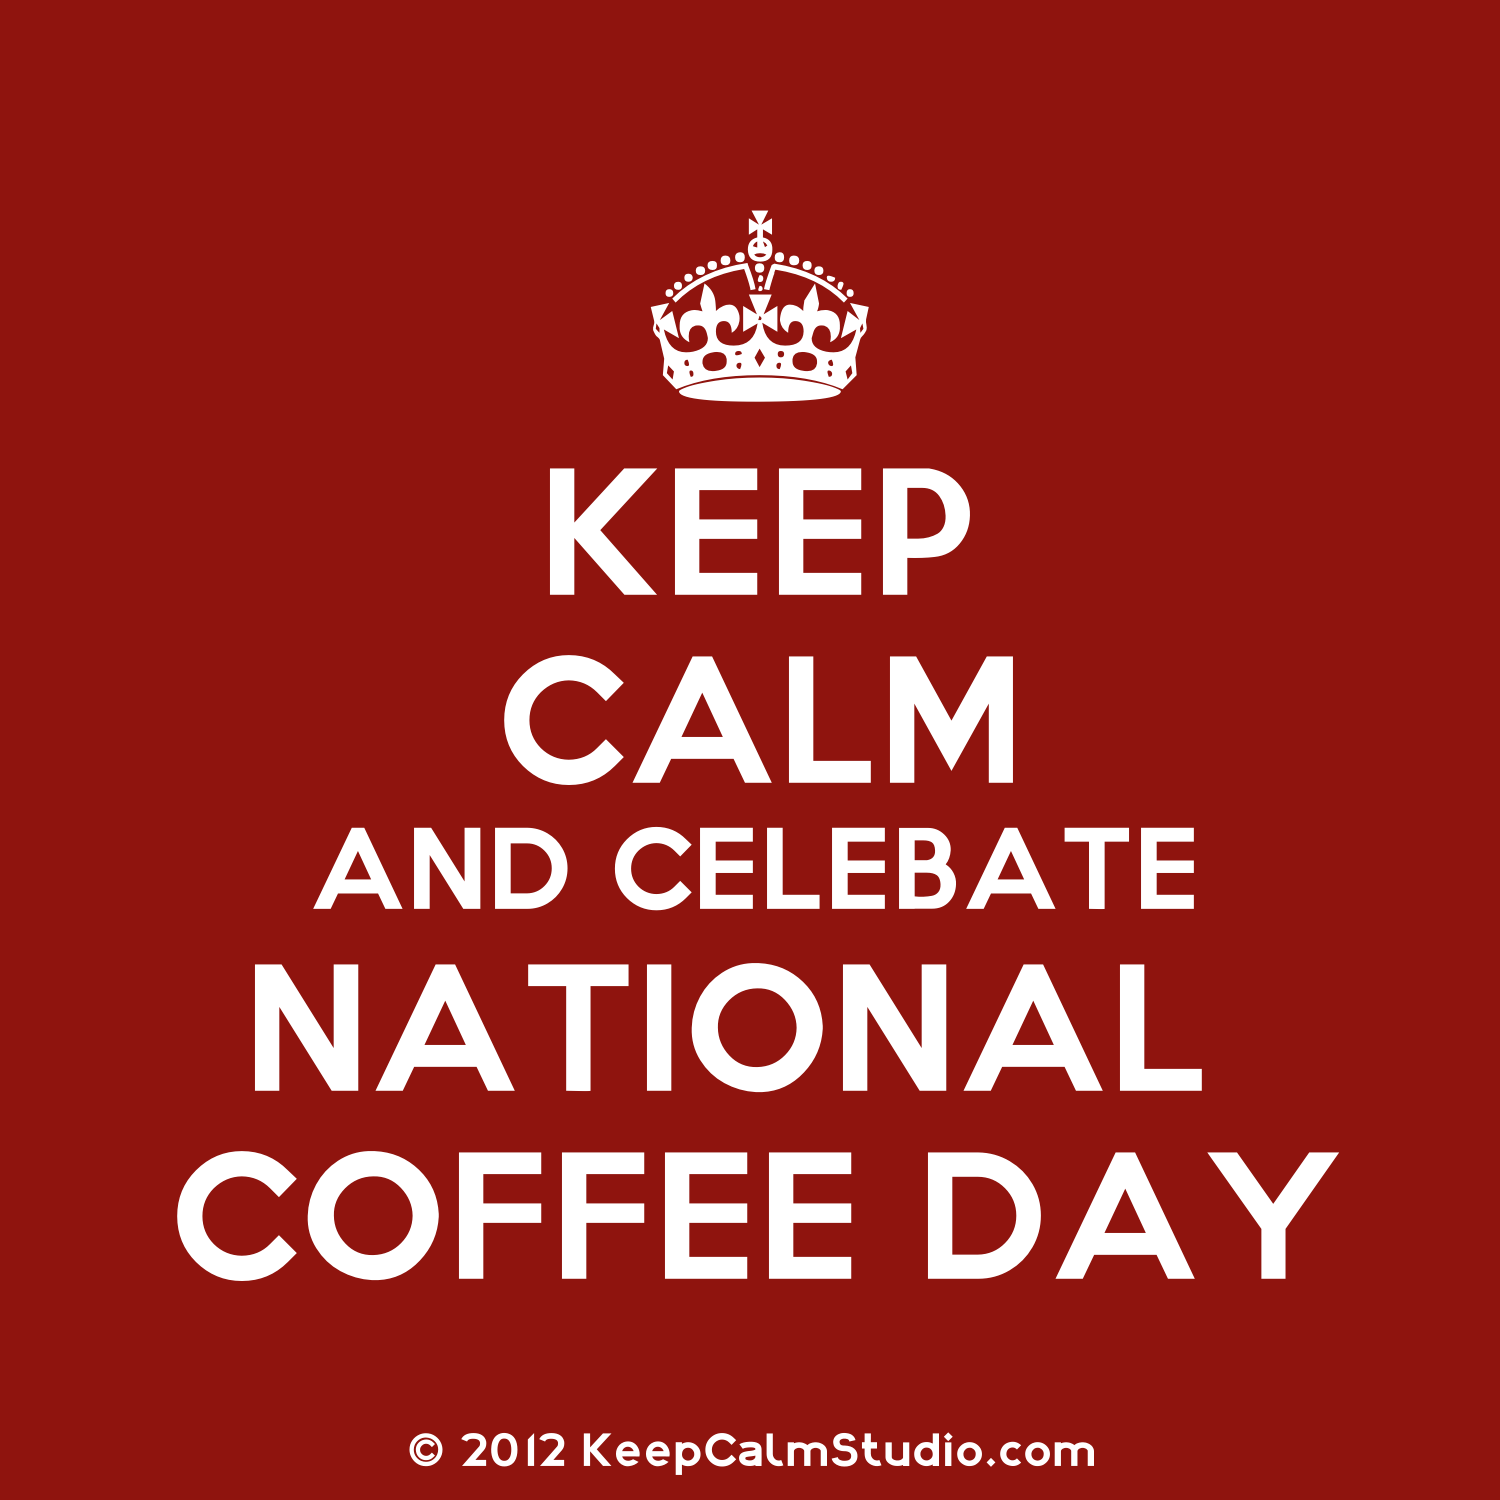 September 29th is National Coffee Day!